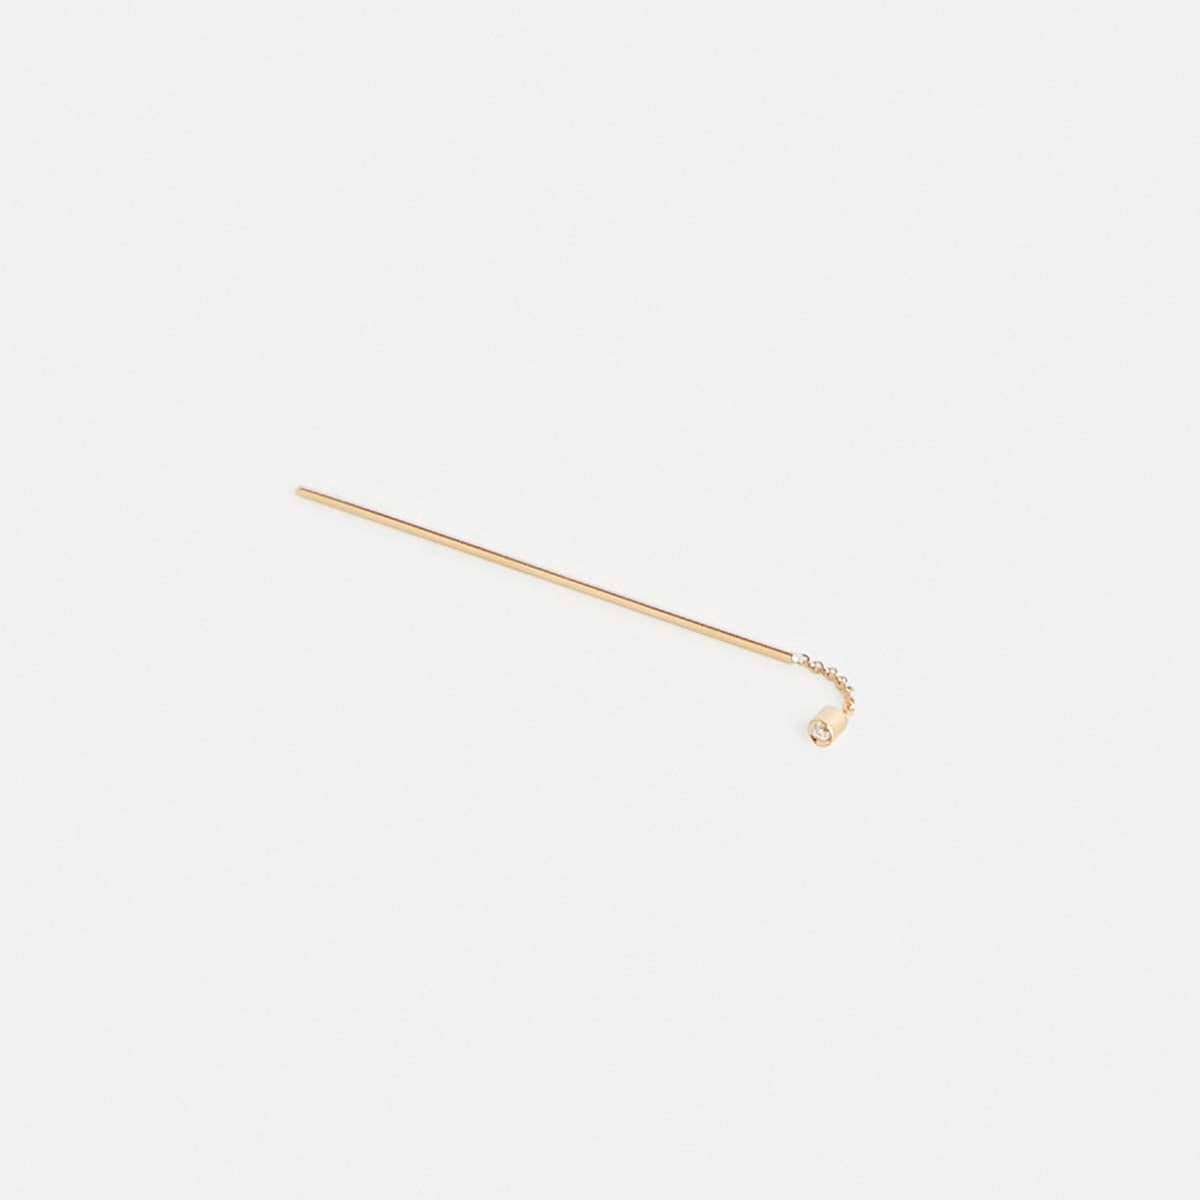 Lini Long Minimalist Pull Through Earrings 14k Gold set with White Diamonds By SHW Fine Jewelry NYC